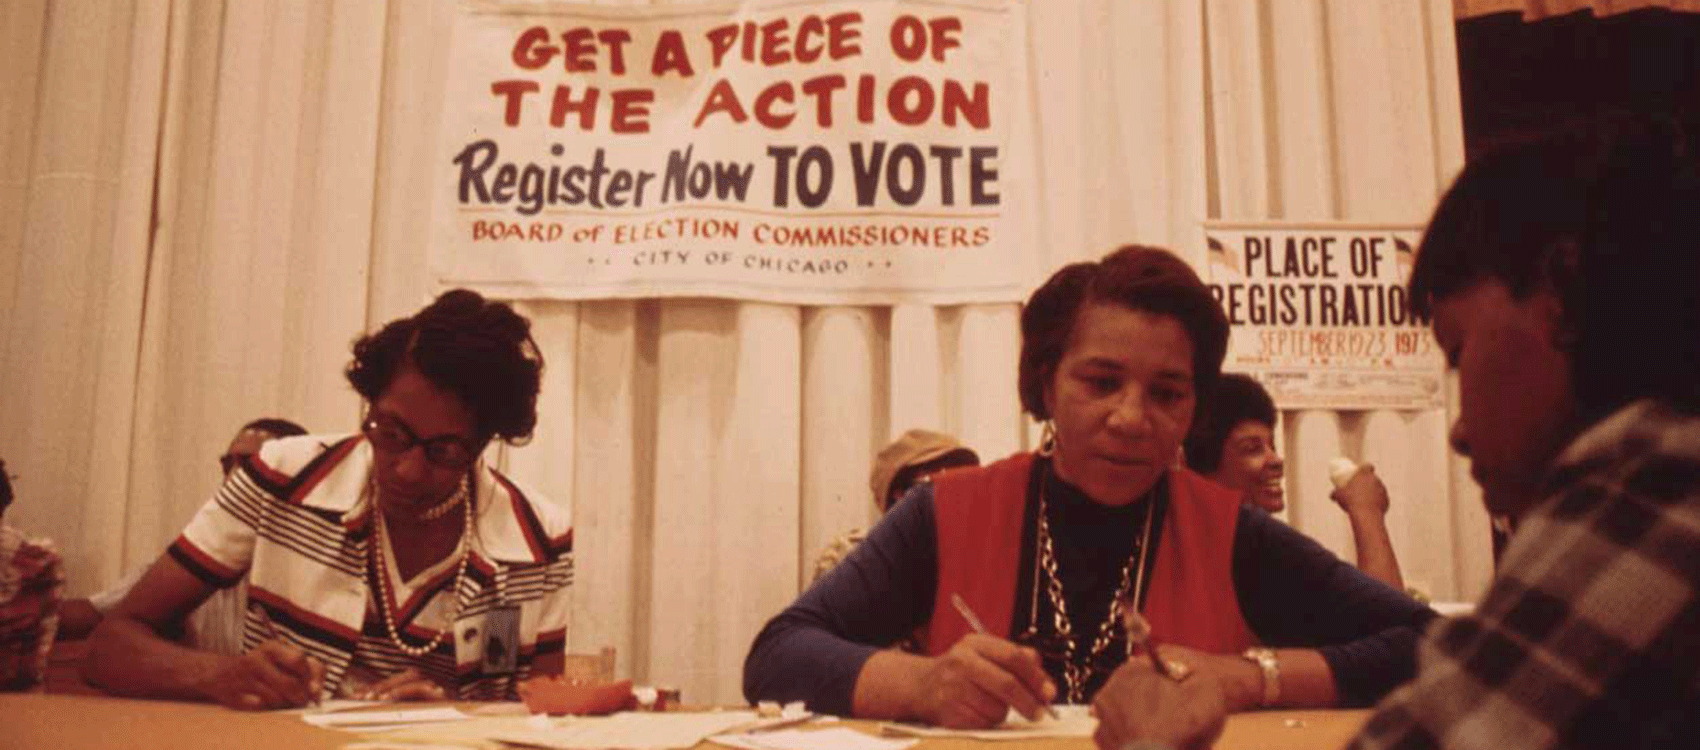 Voter registration at 1973 Black Expo in Chicago. Photo by John H. White